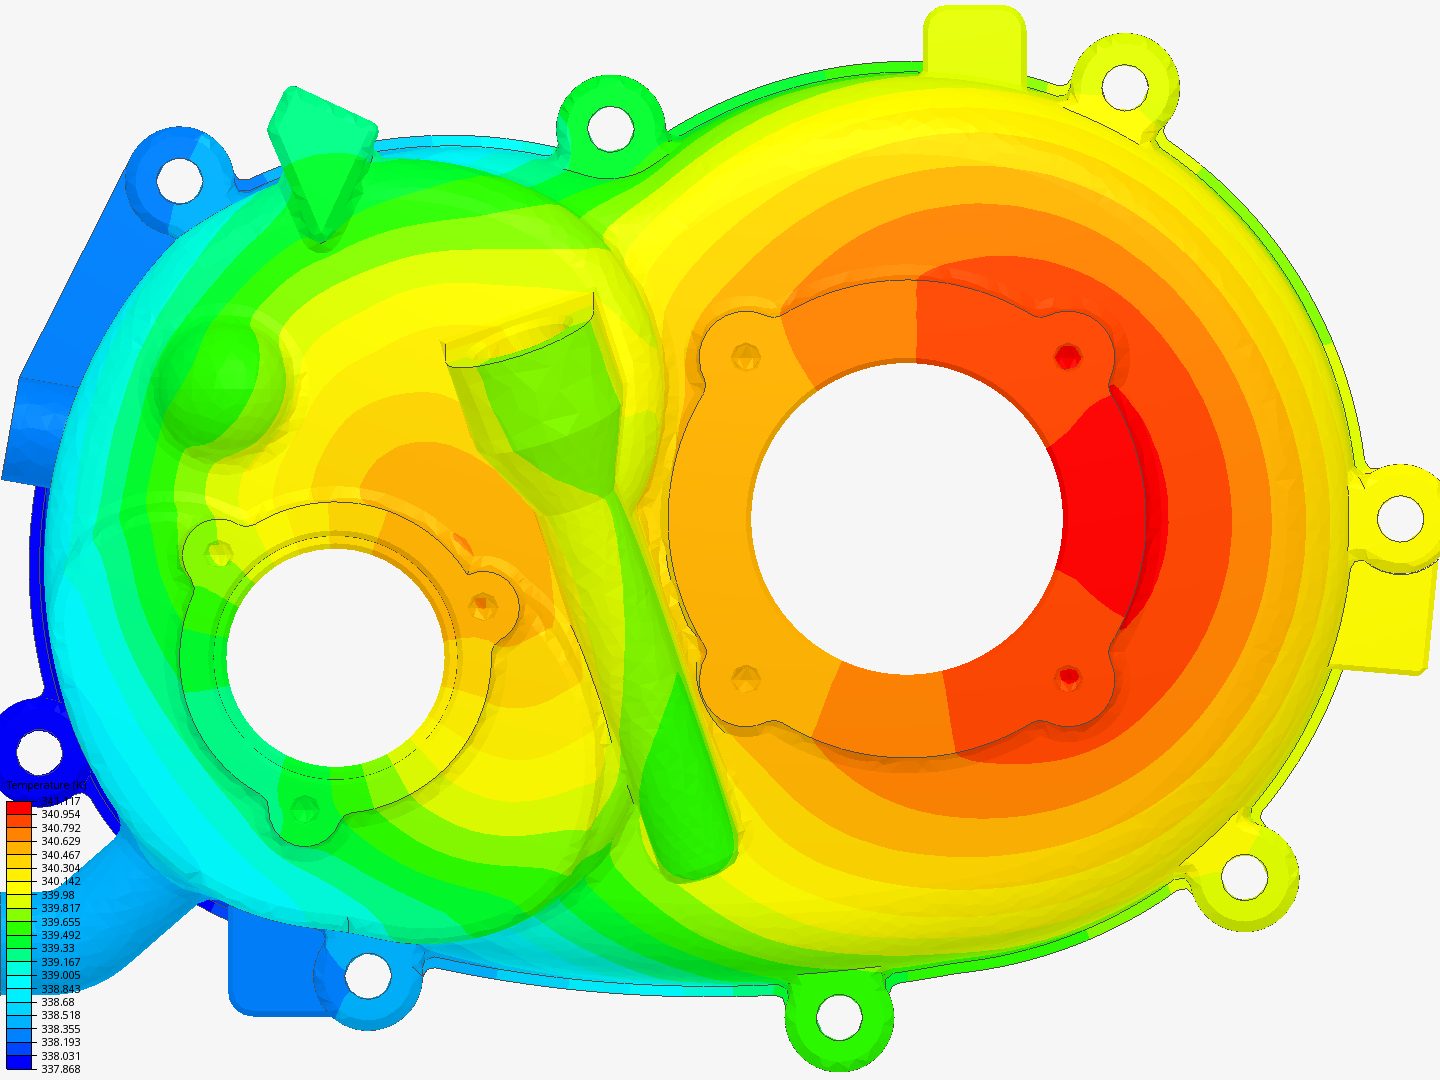 Tutorial: Thermal Analysis of a Differential Casing New image